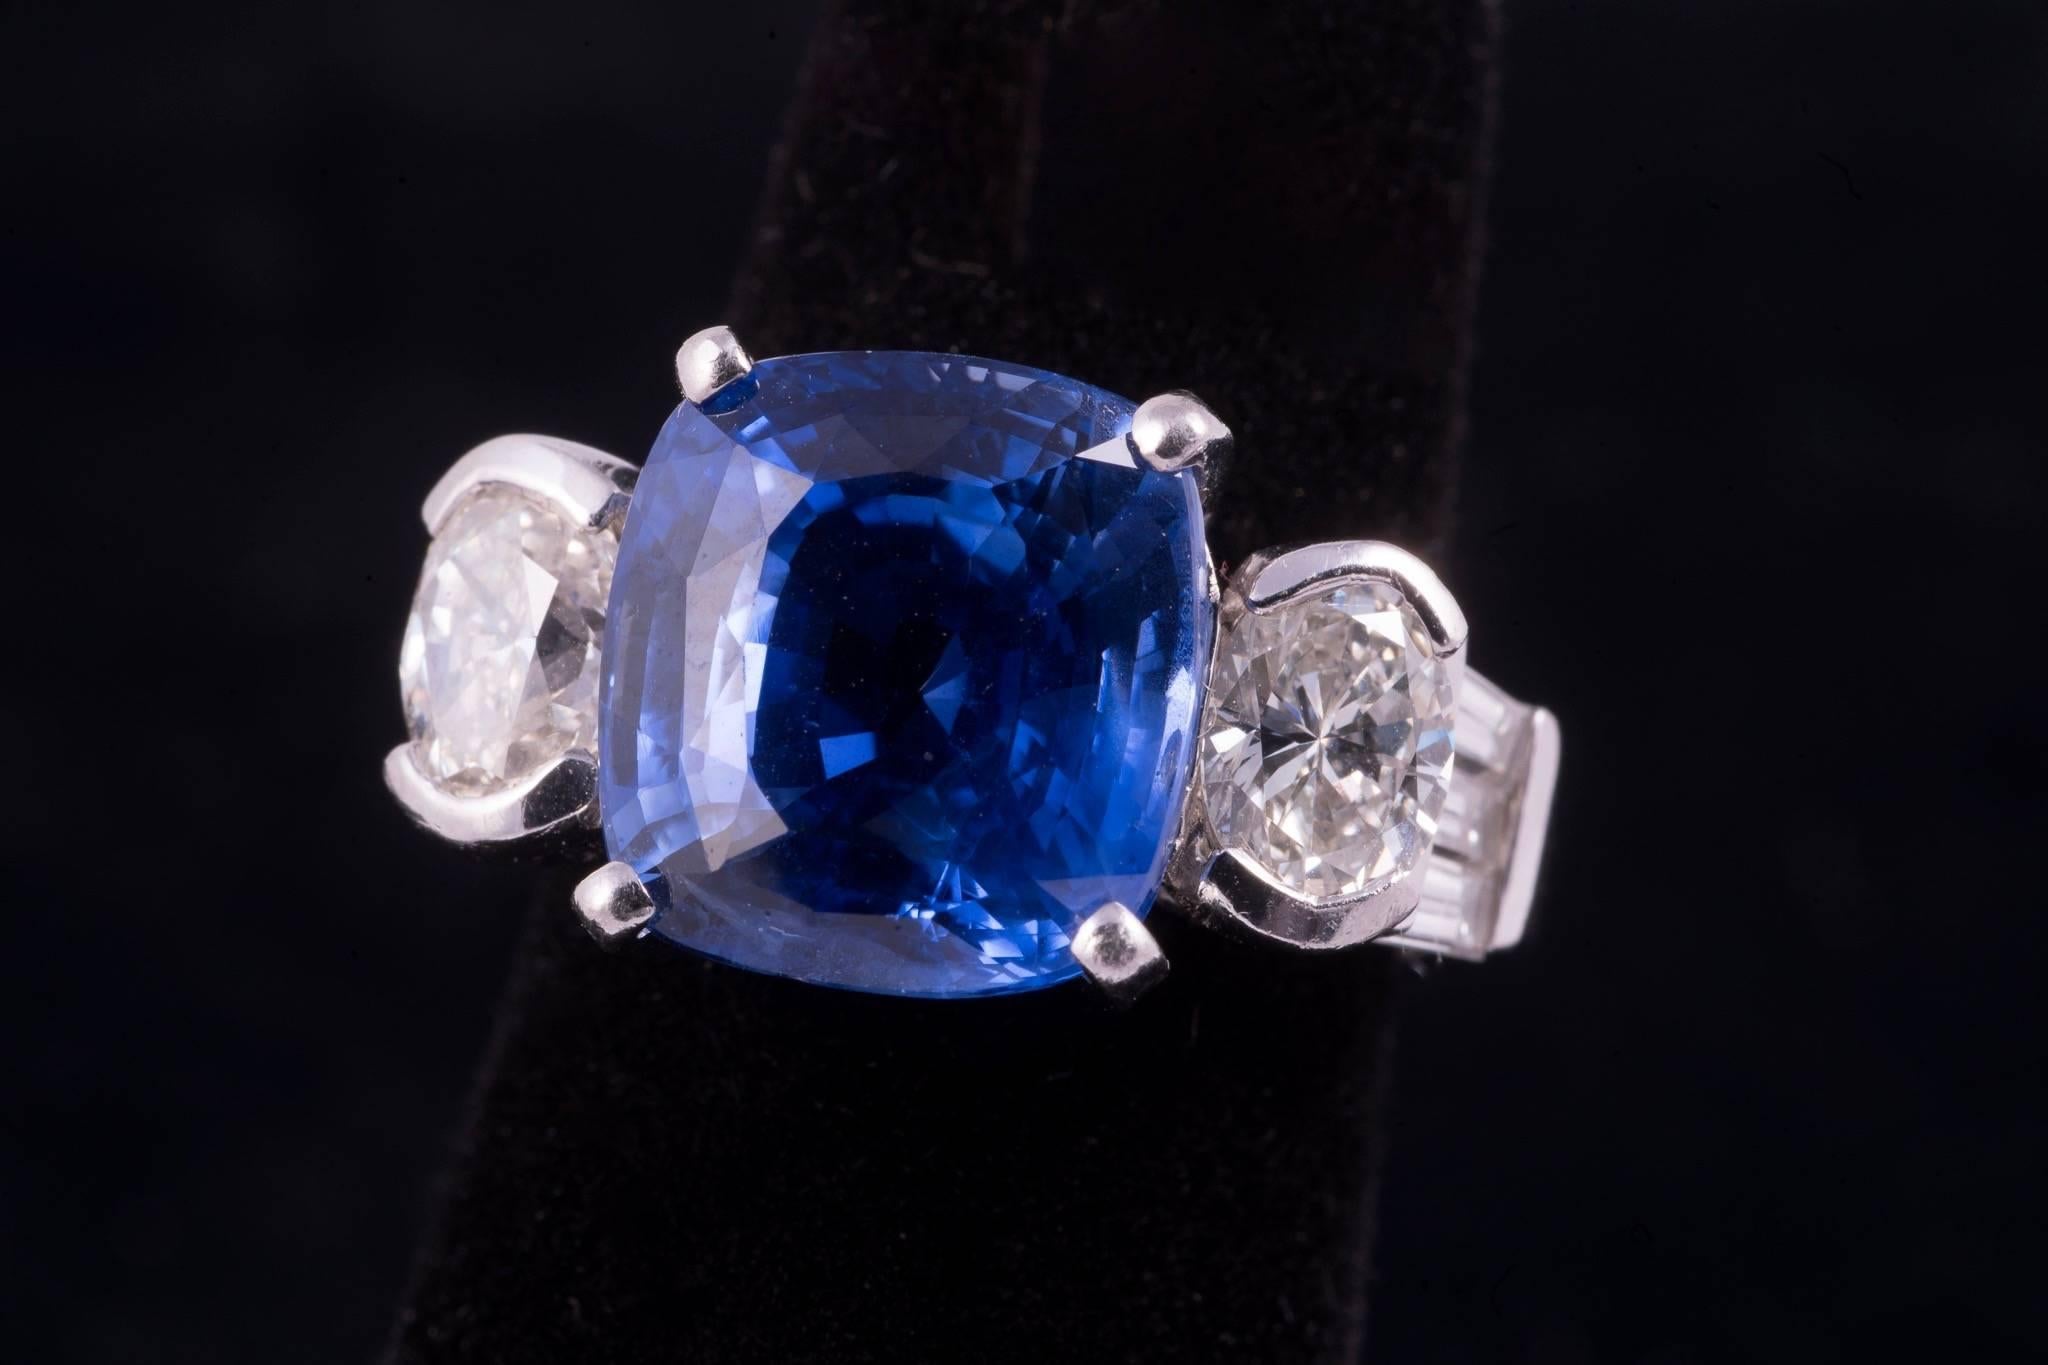 Sapphire and diamond ring. The center sapphire is is cushion cut, weighs approx. 8.75cts, has strong medium blue color and clean clarity. There are 2 oval diamonds on either side that weigh approx. 1.25cts total. There are 6 taper baguette diamonds